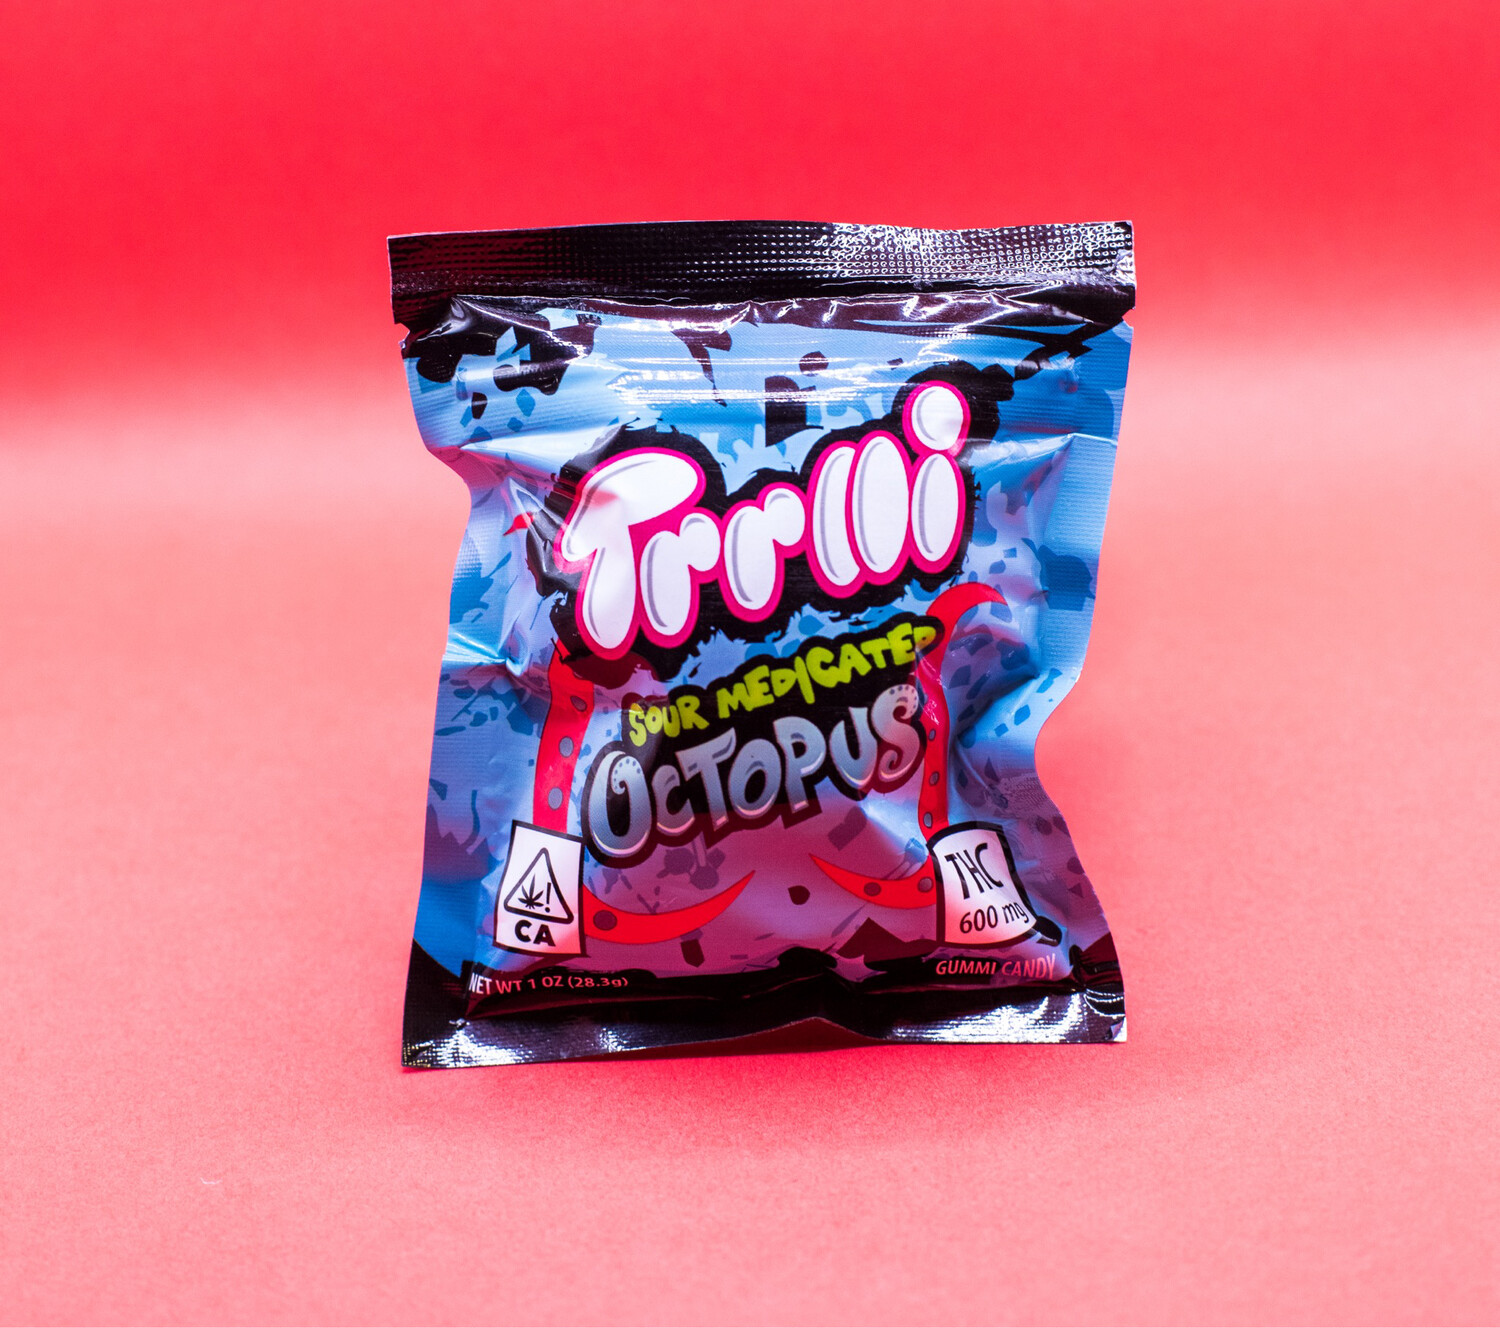 Trolli Sour Medicated Octopus 